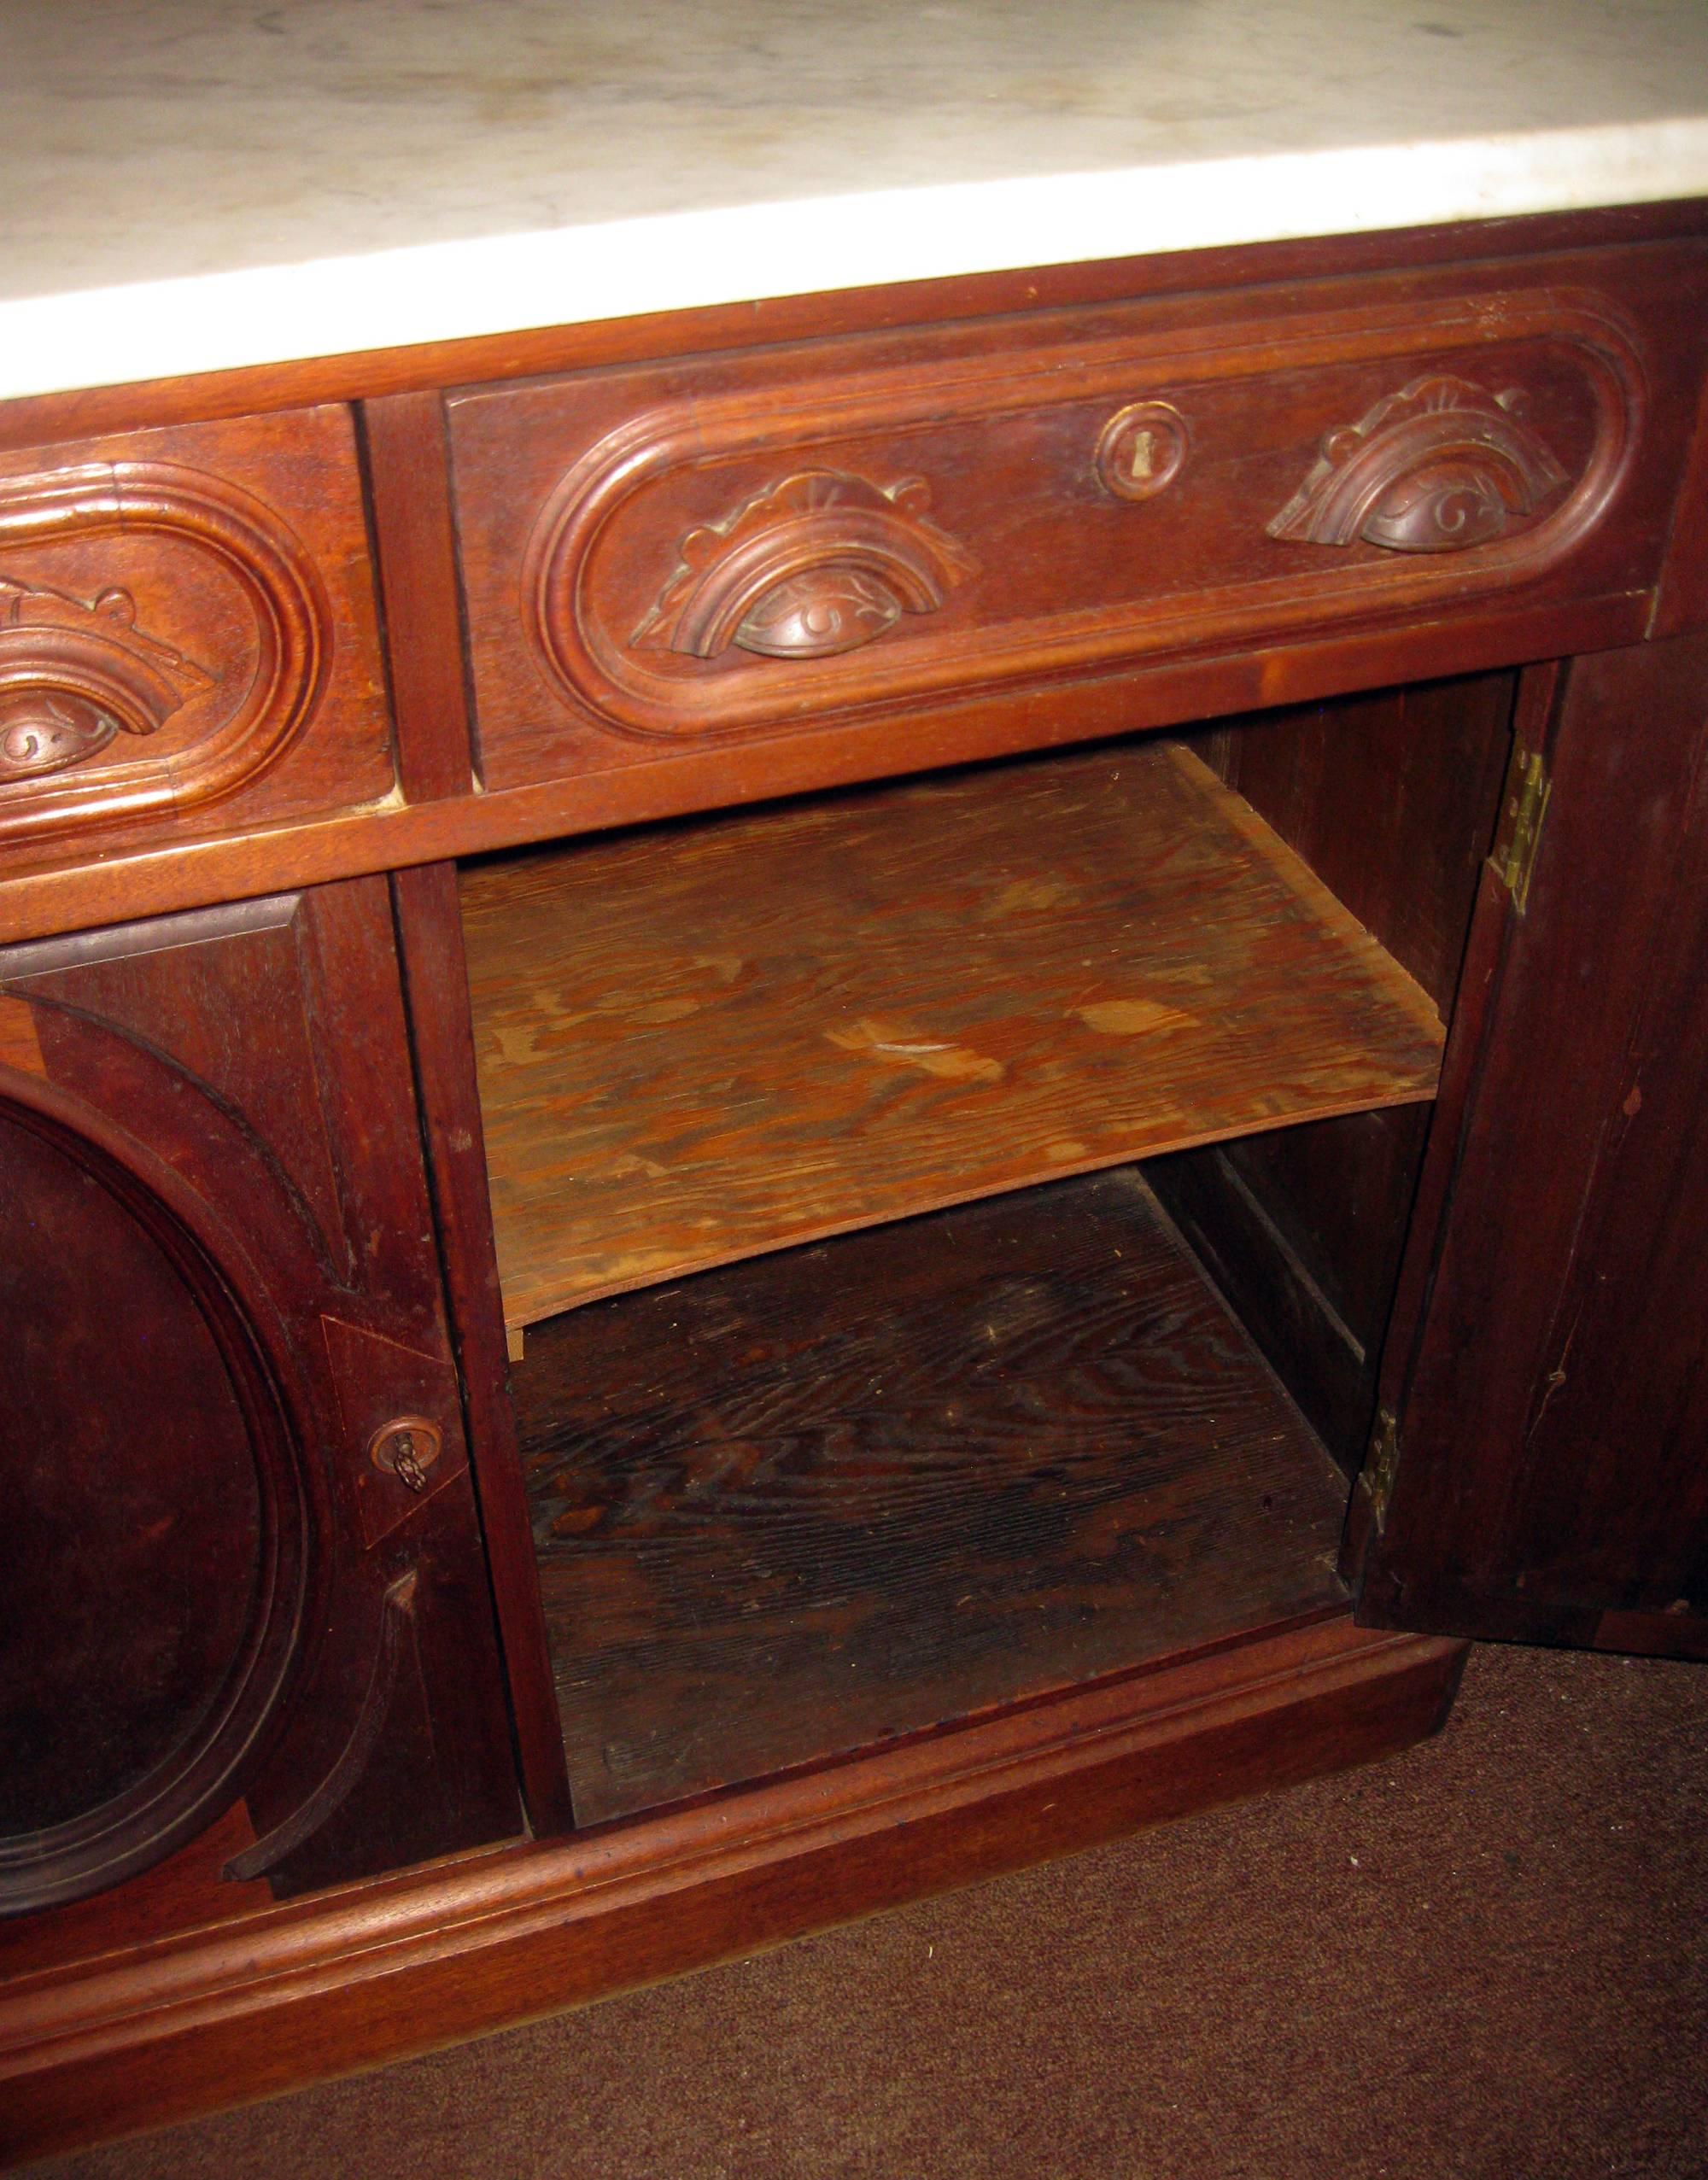 High Victorian 19th century Victorian Walnut Server Sideboard with Marble Top For Sale